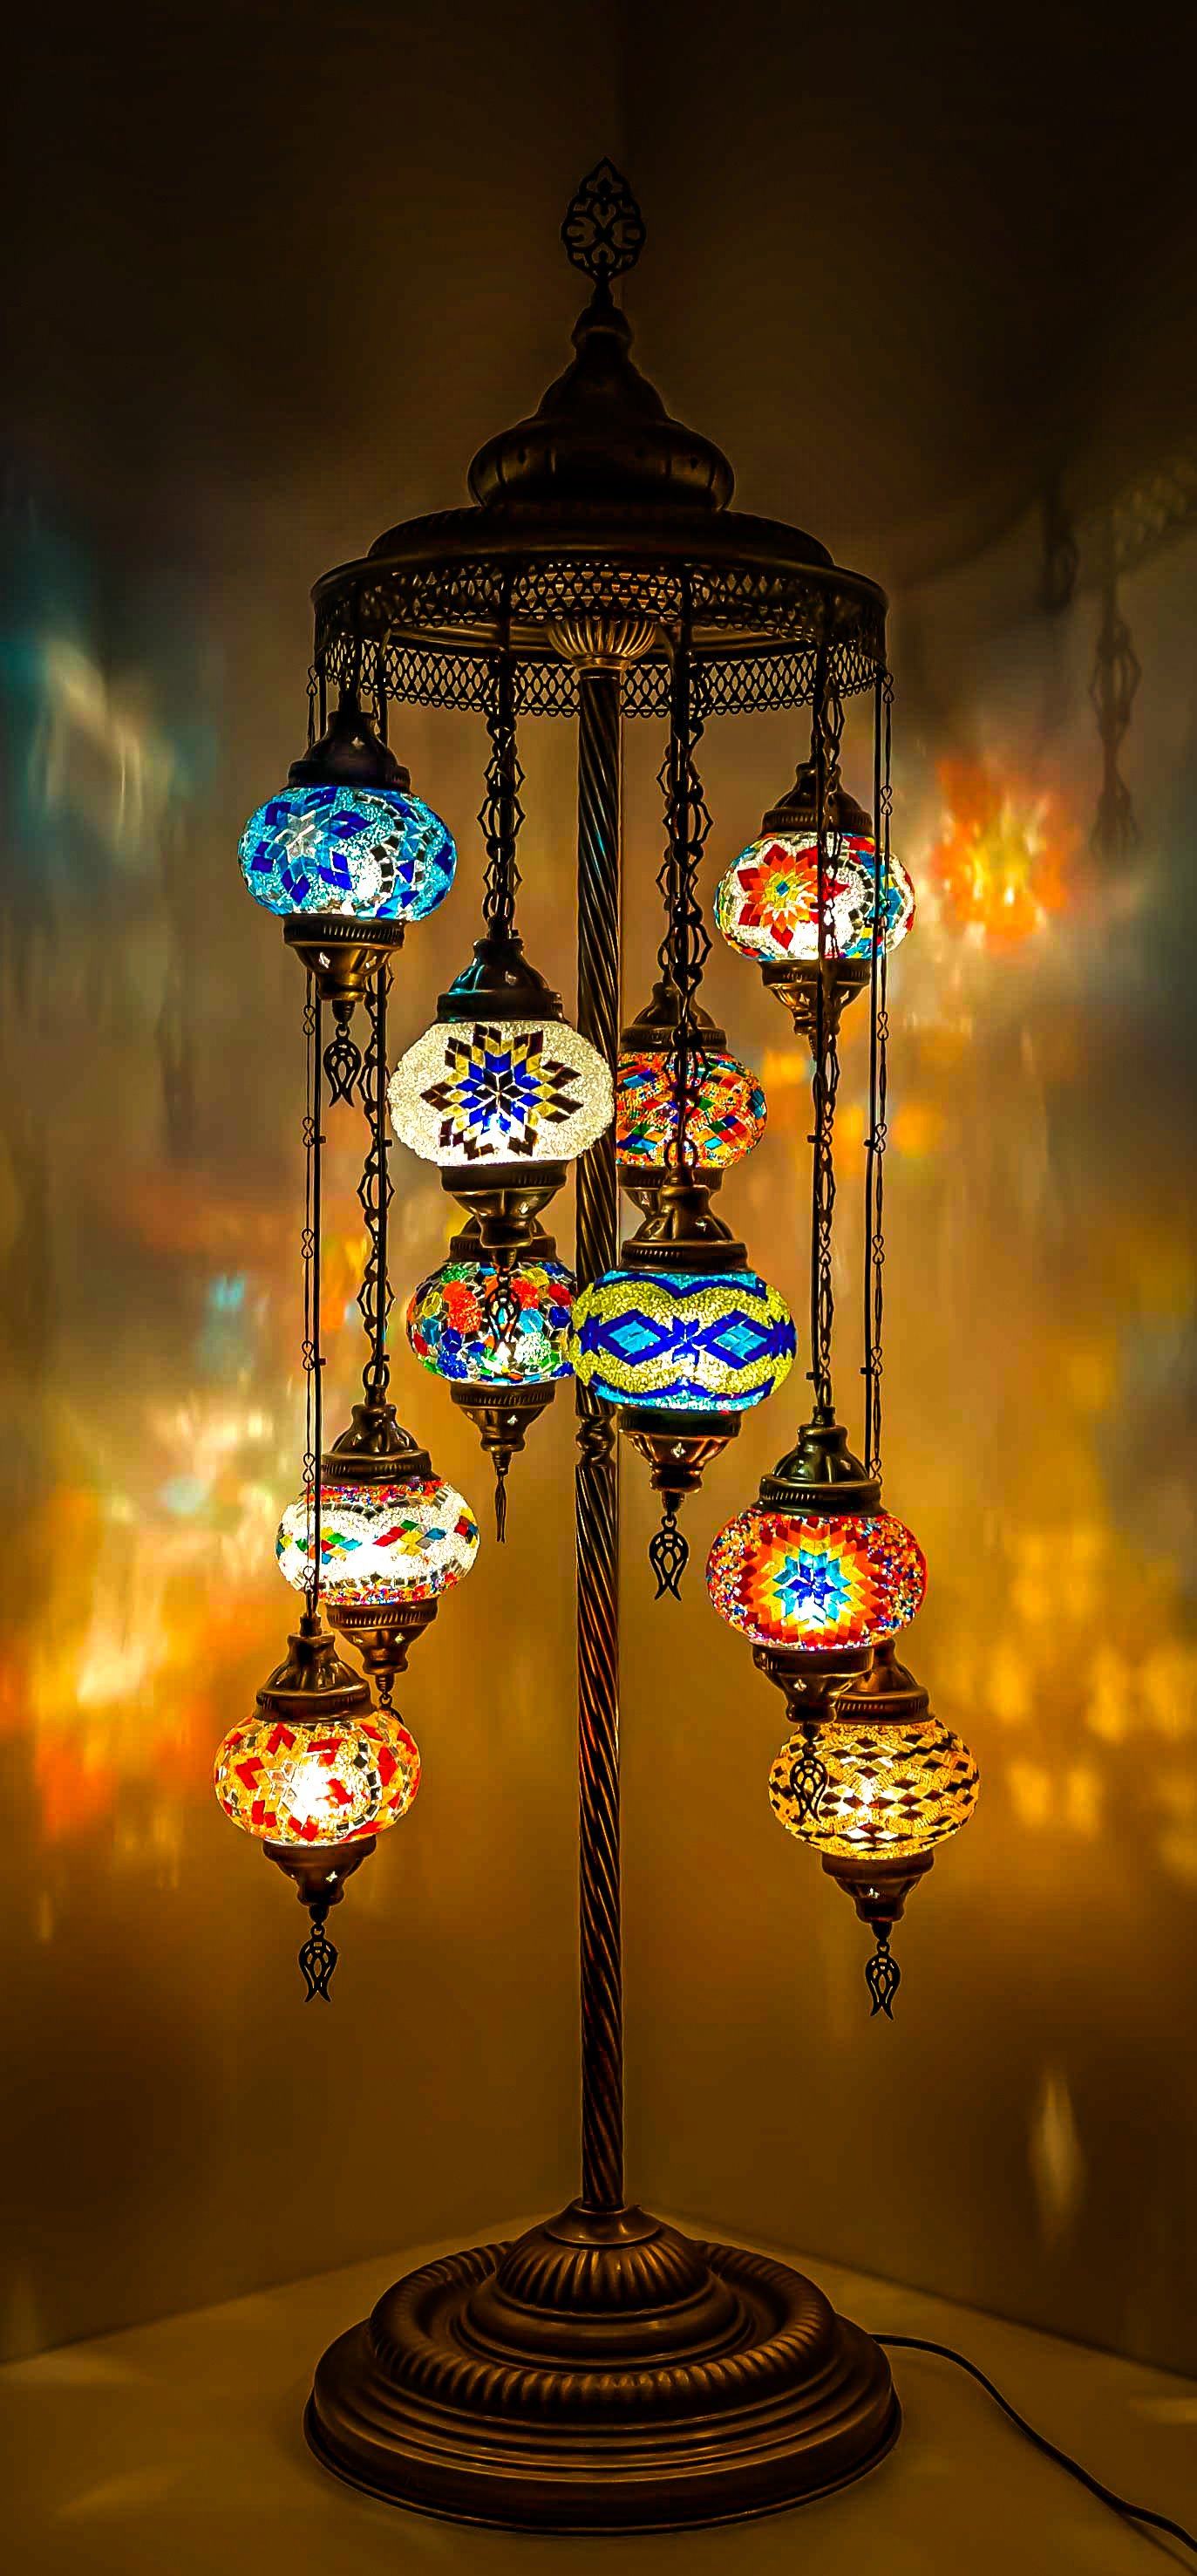 Handmade Mosaic Lamp ONLINE EXCLUSIVE PRICES (FAST & FREE EXPEDITED SHIPPING)